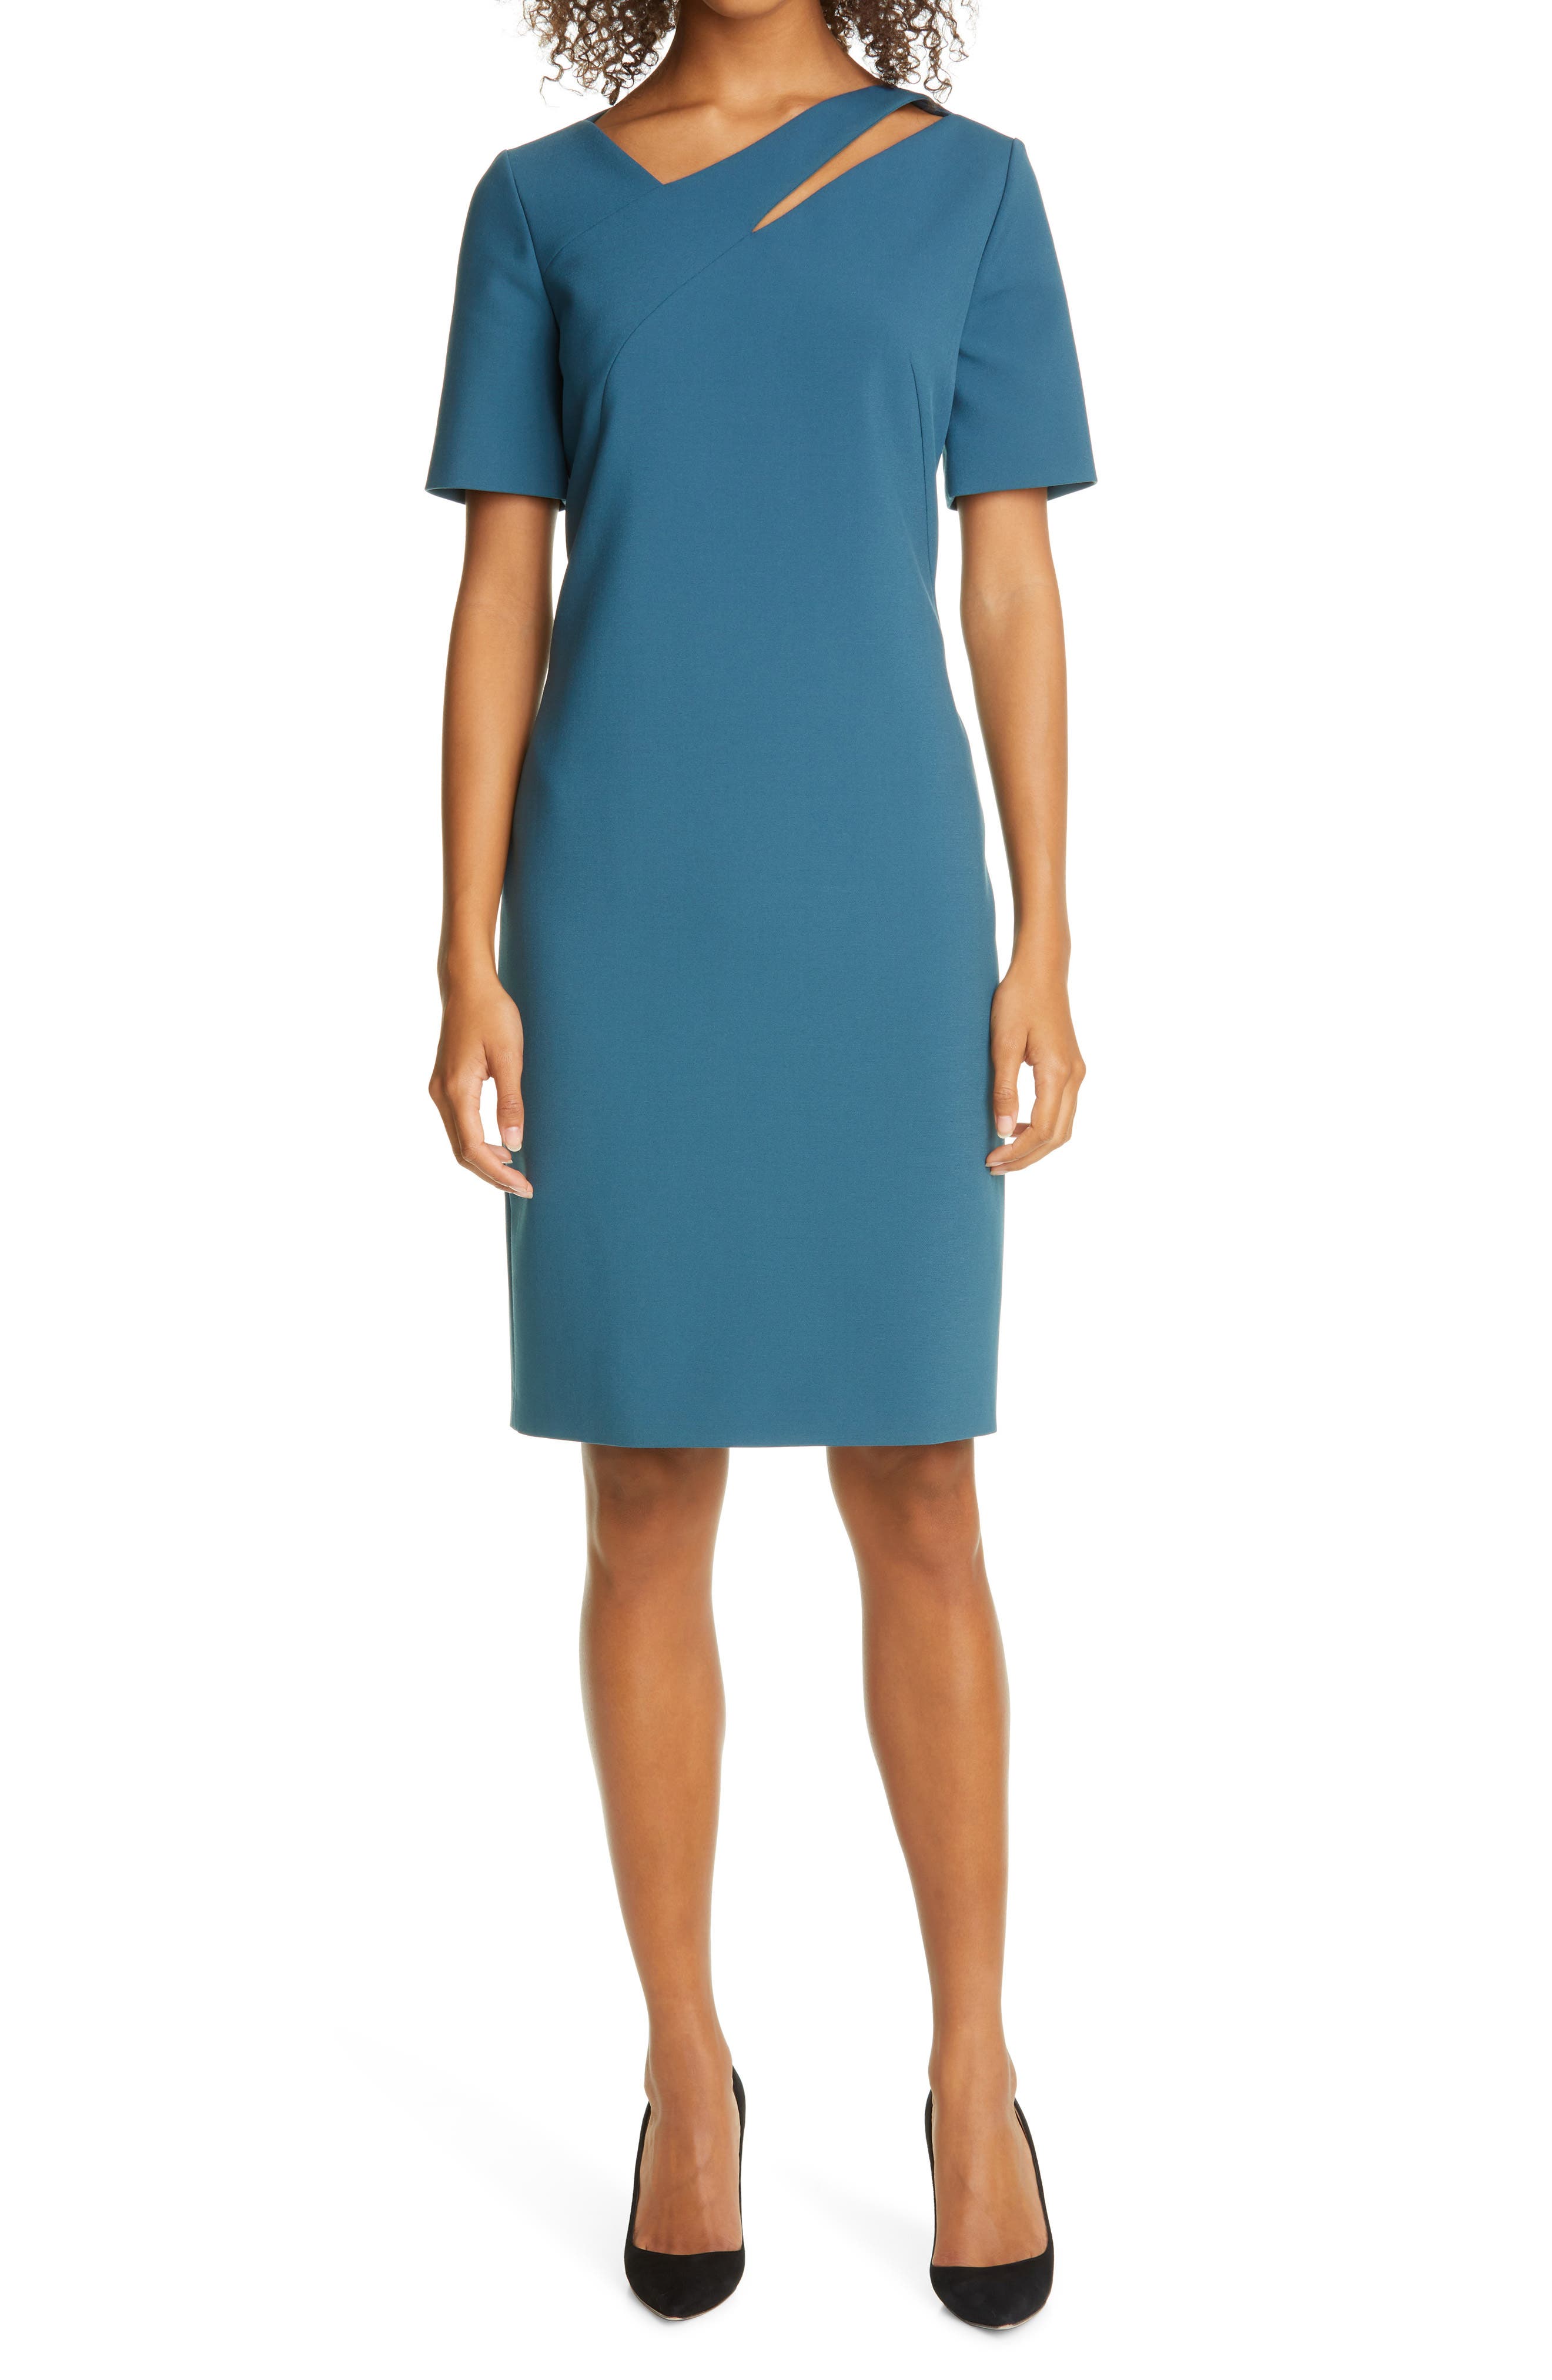 cut out dresses nordstrom